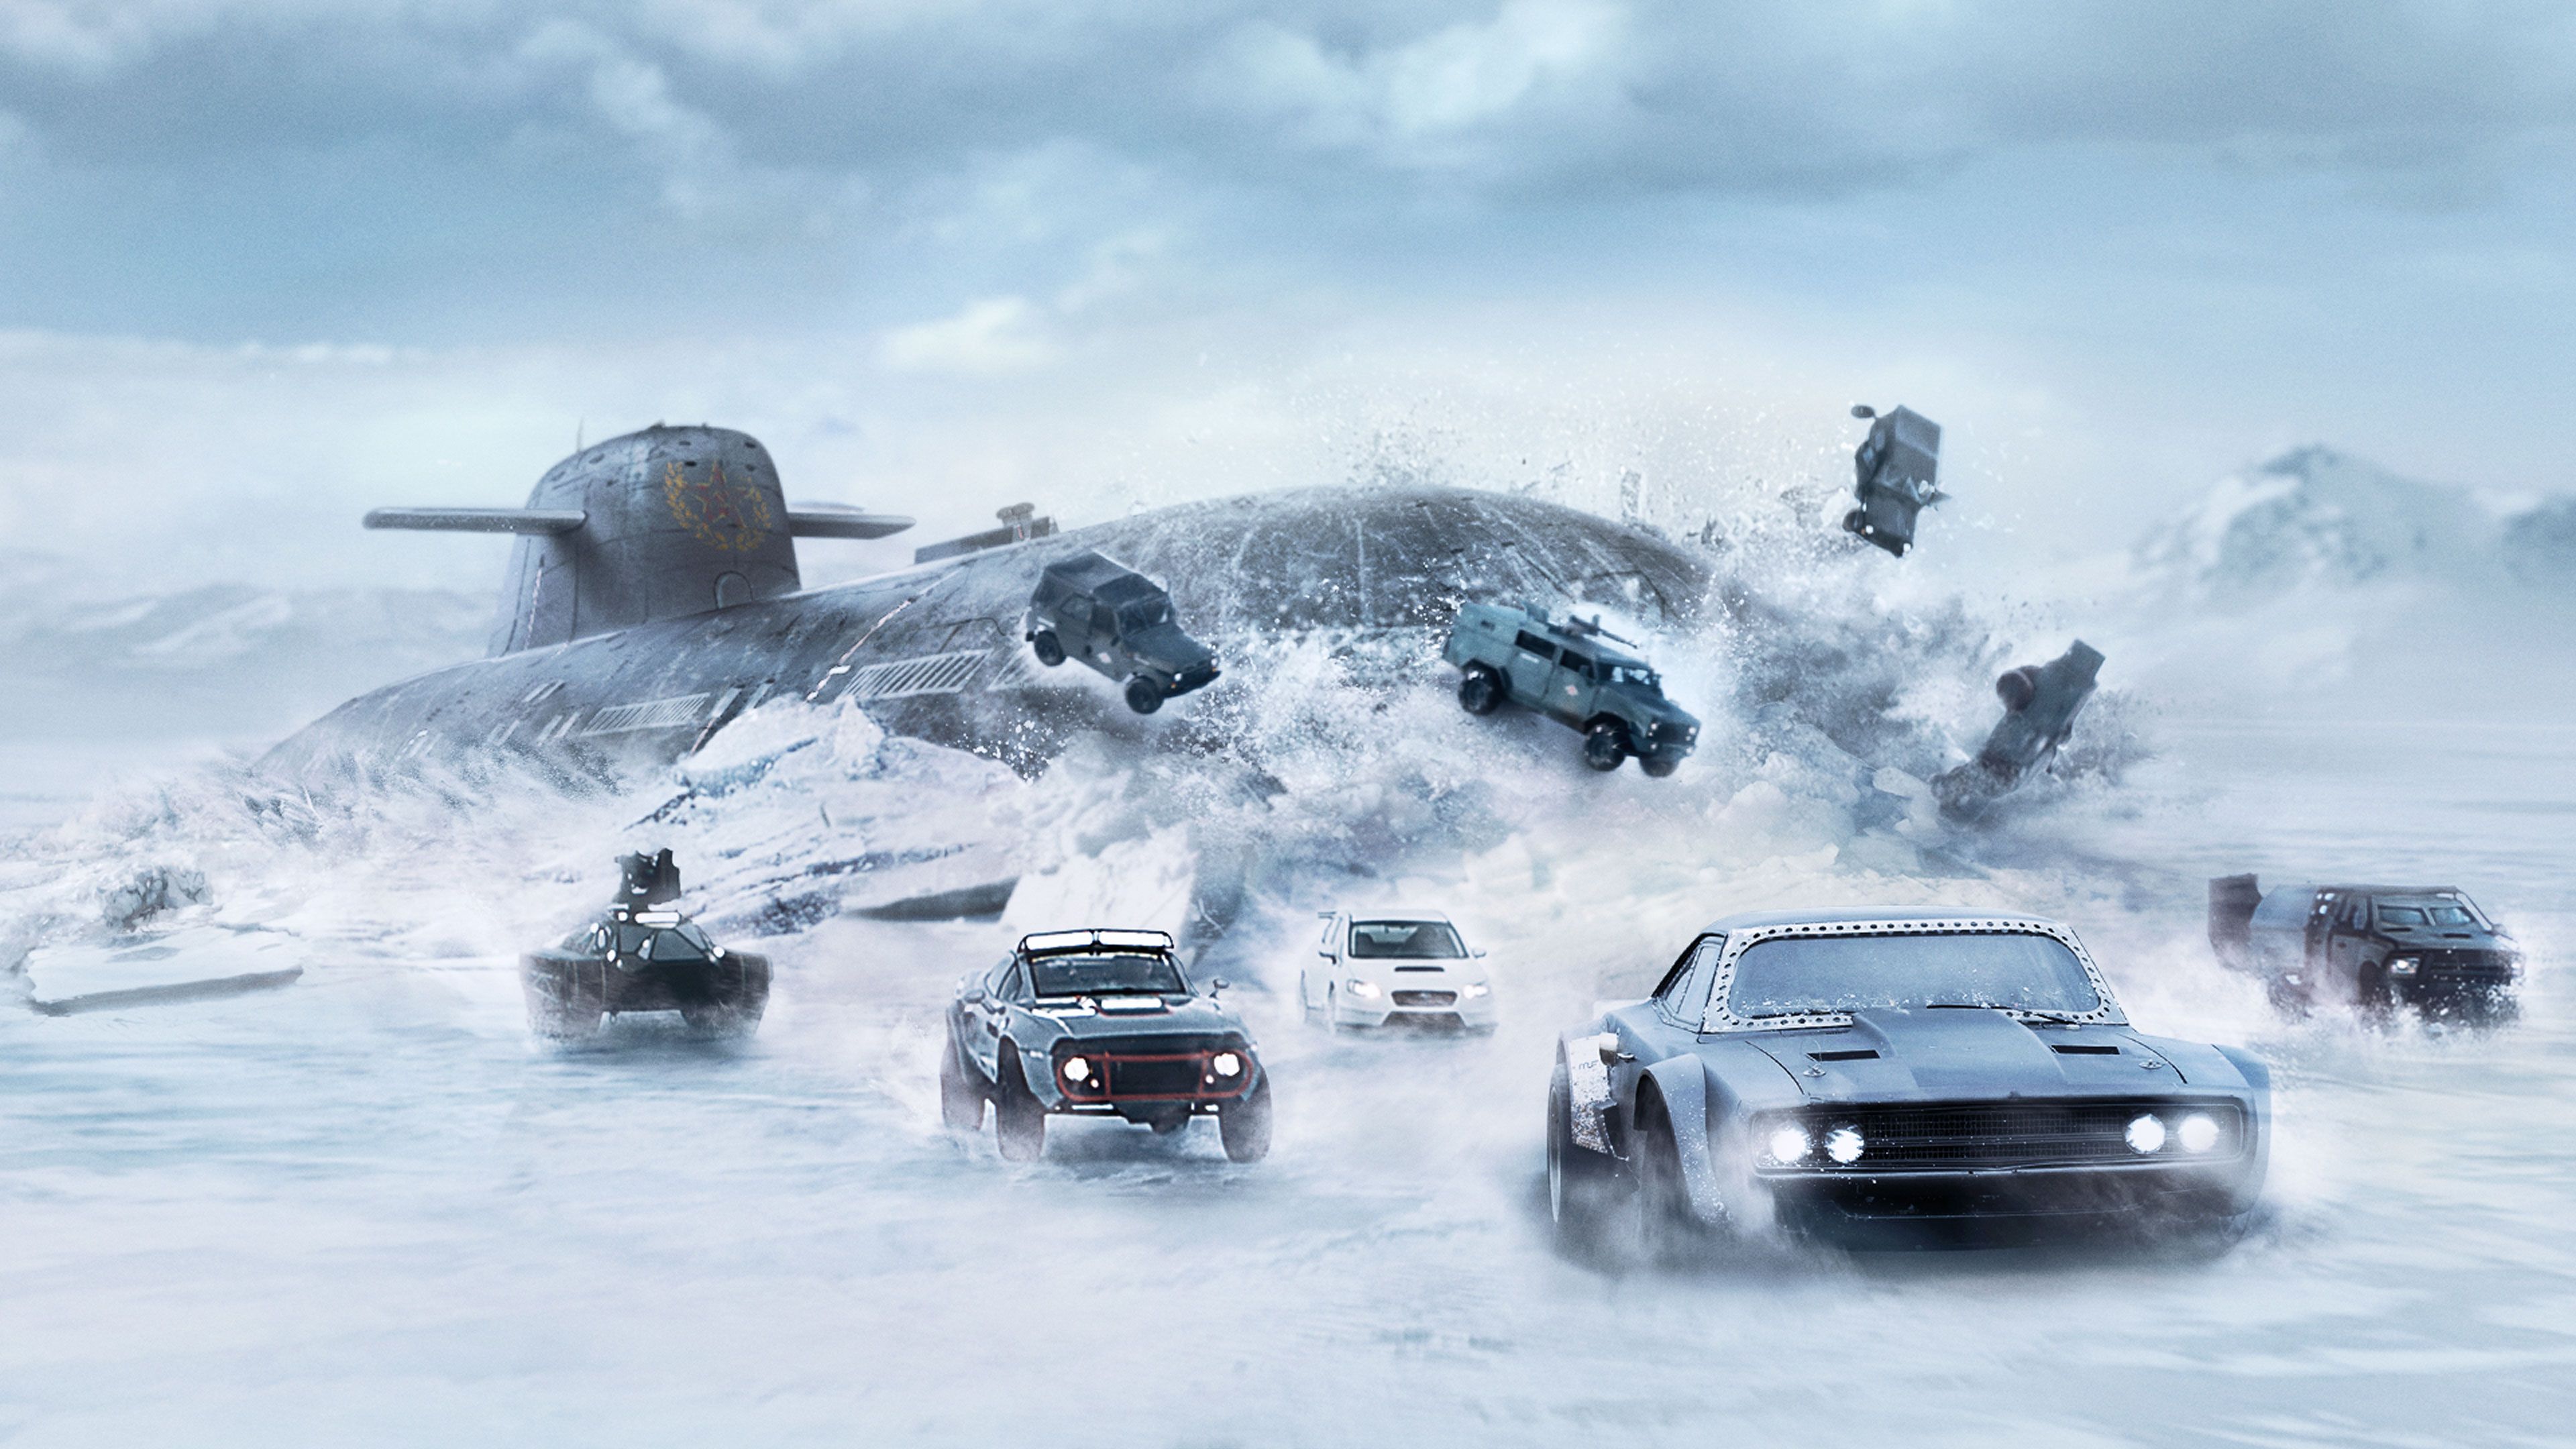 The Fate Of The Furious | Full Movie | Movies Anywhere